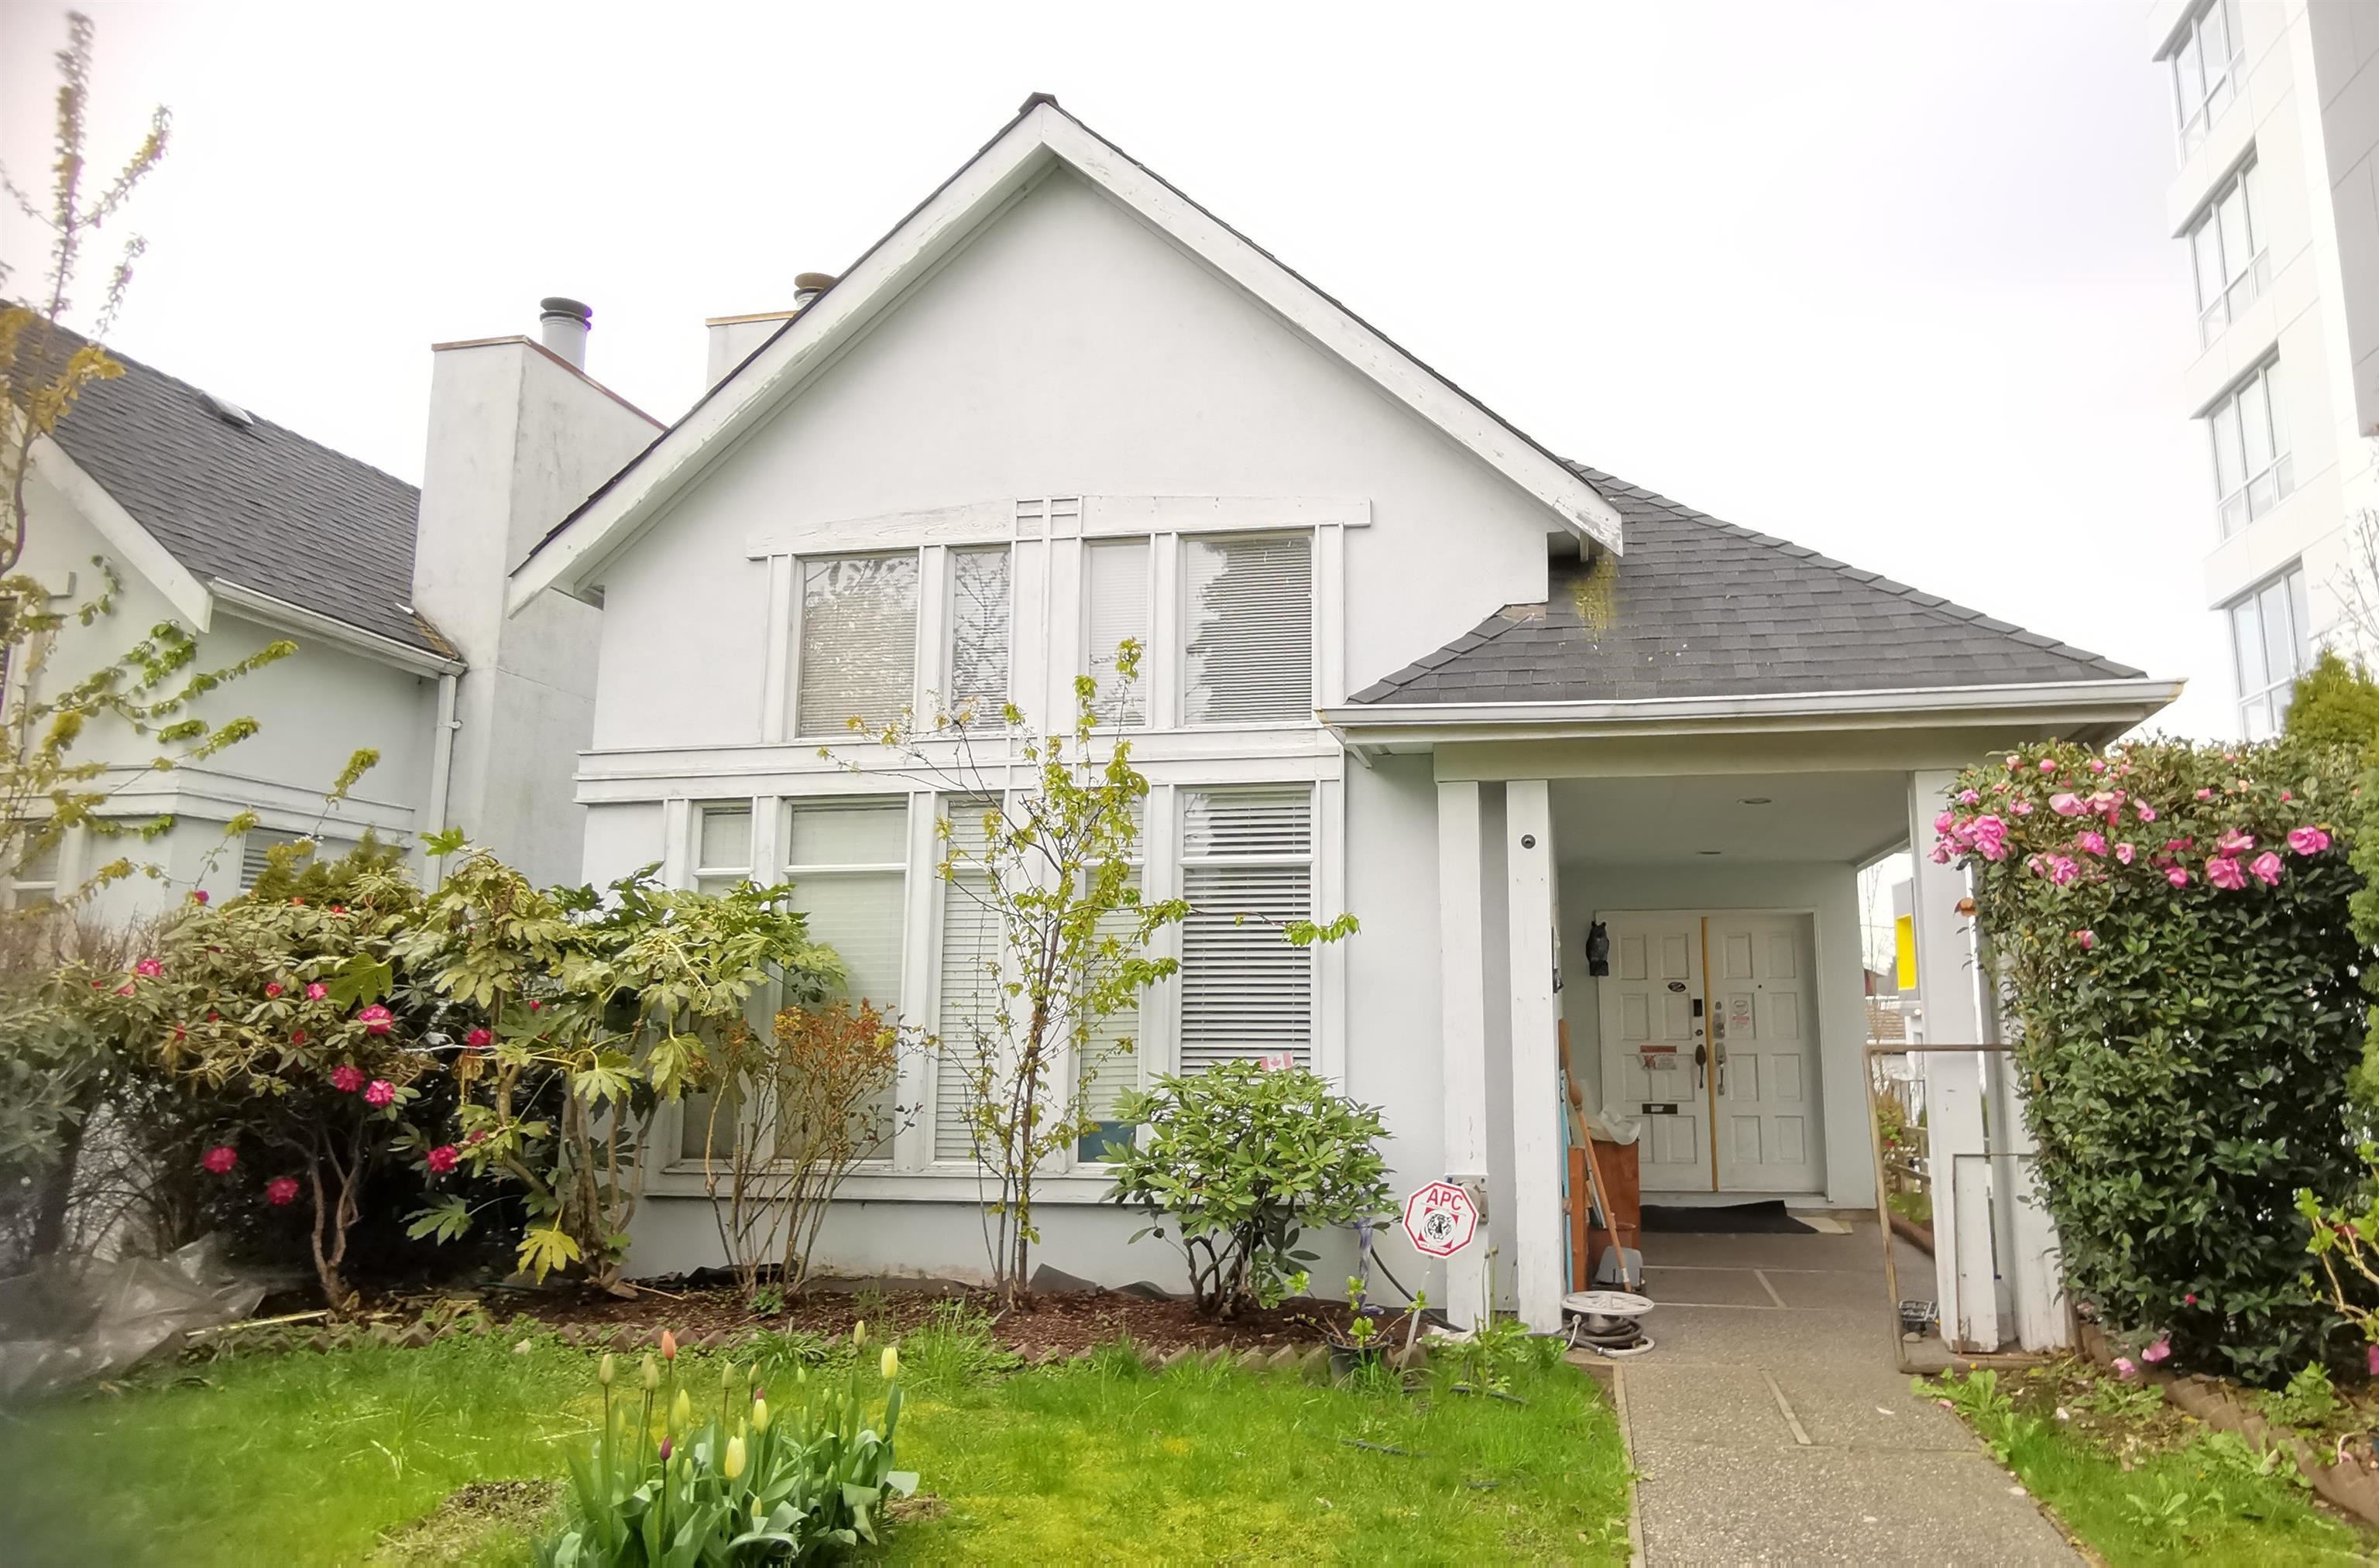 Listing image of 6298 CAMBIE STREET